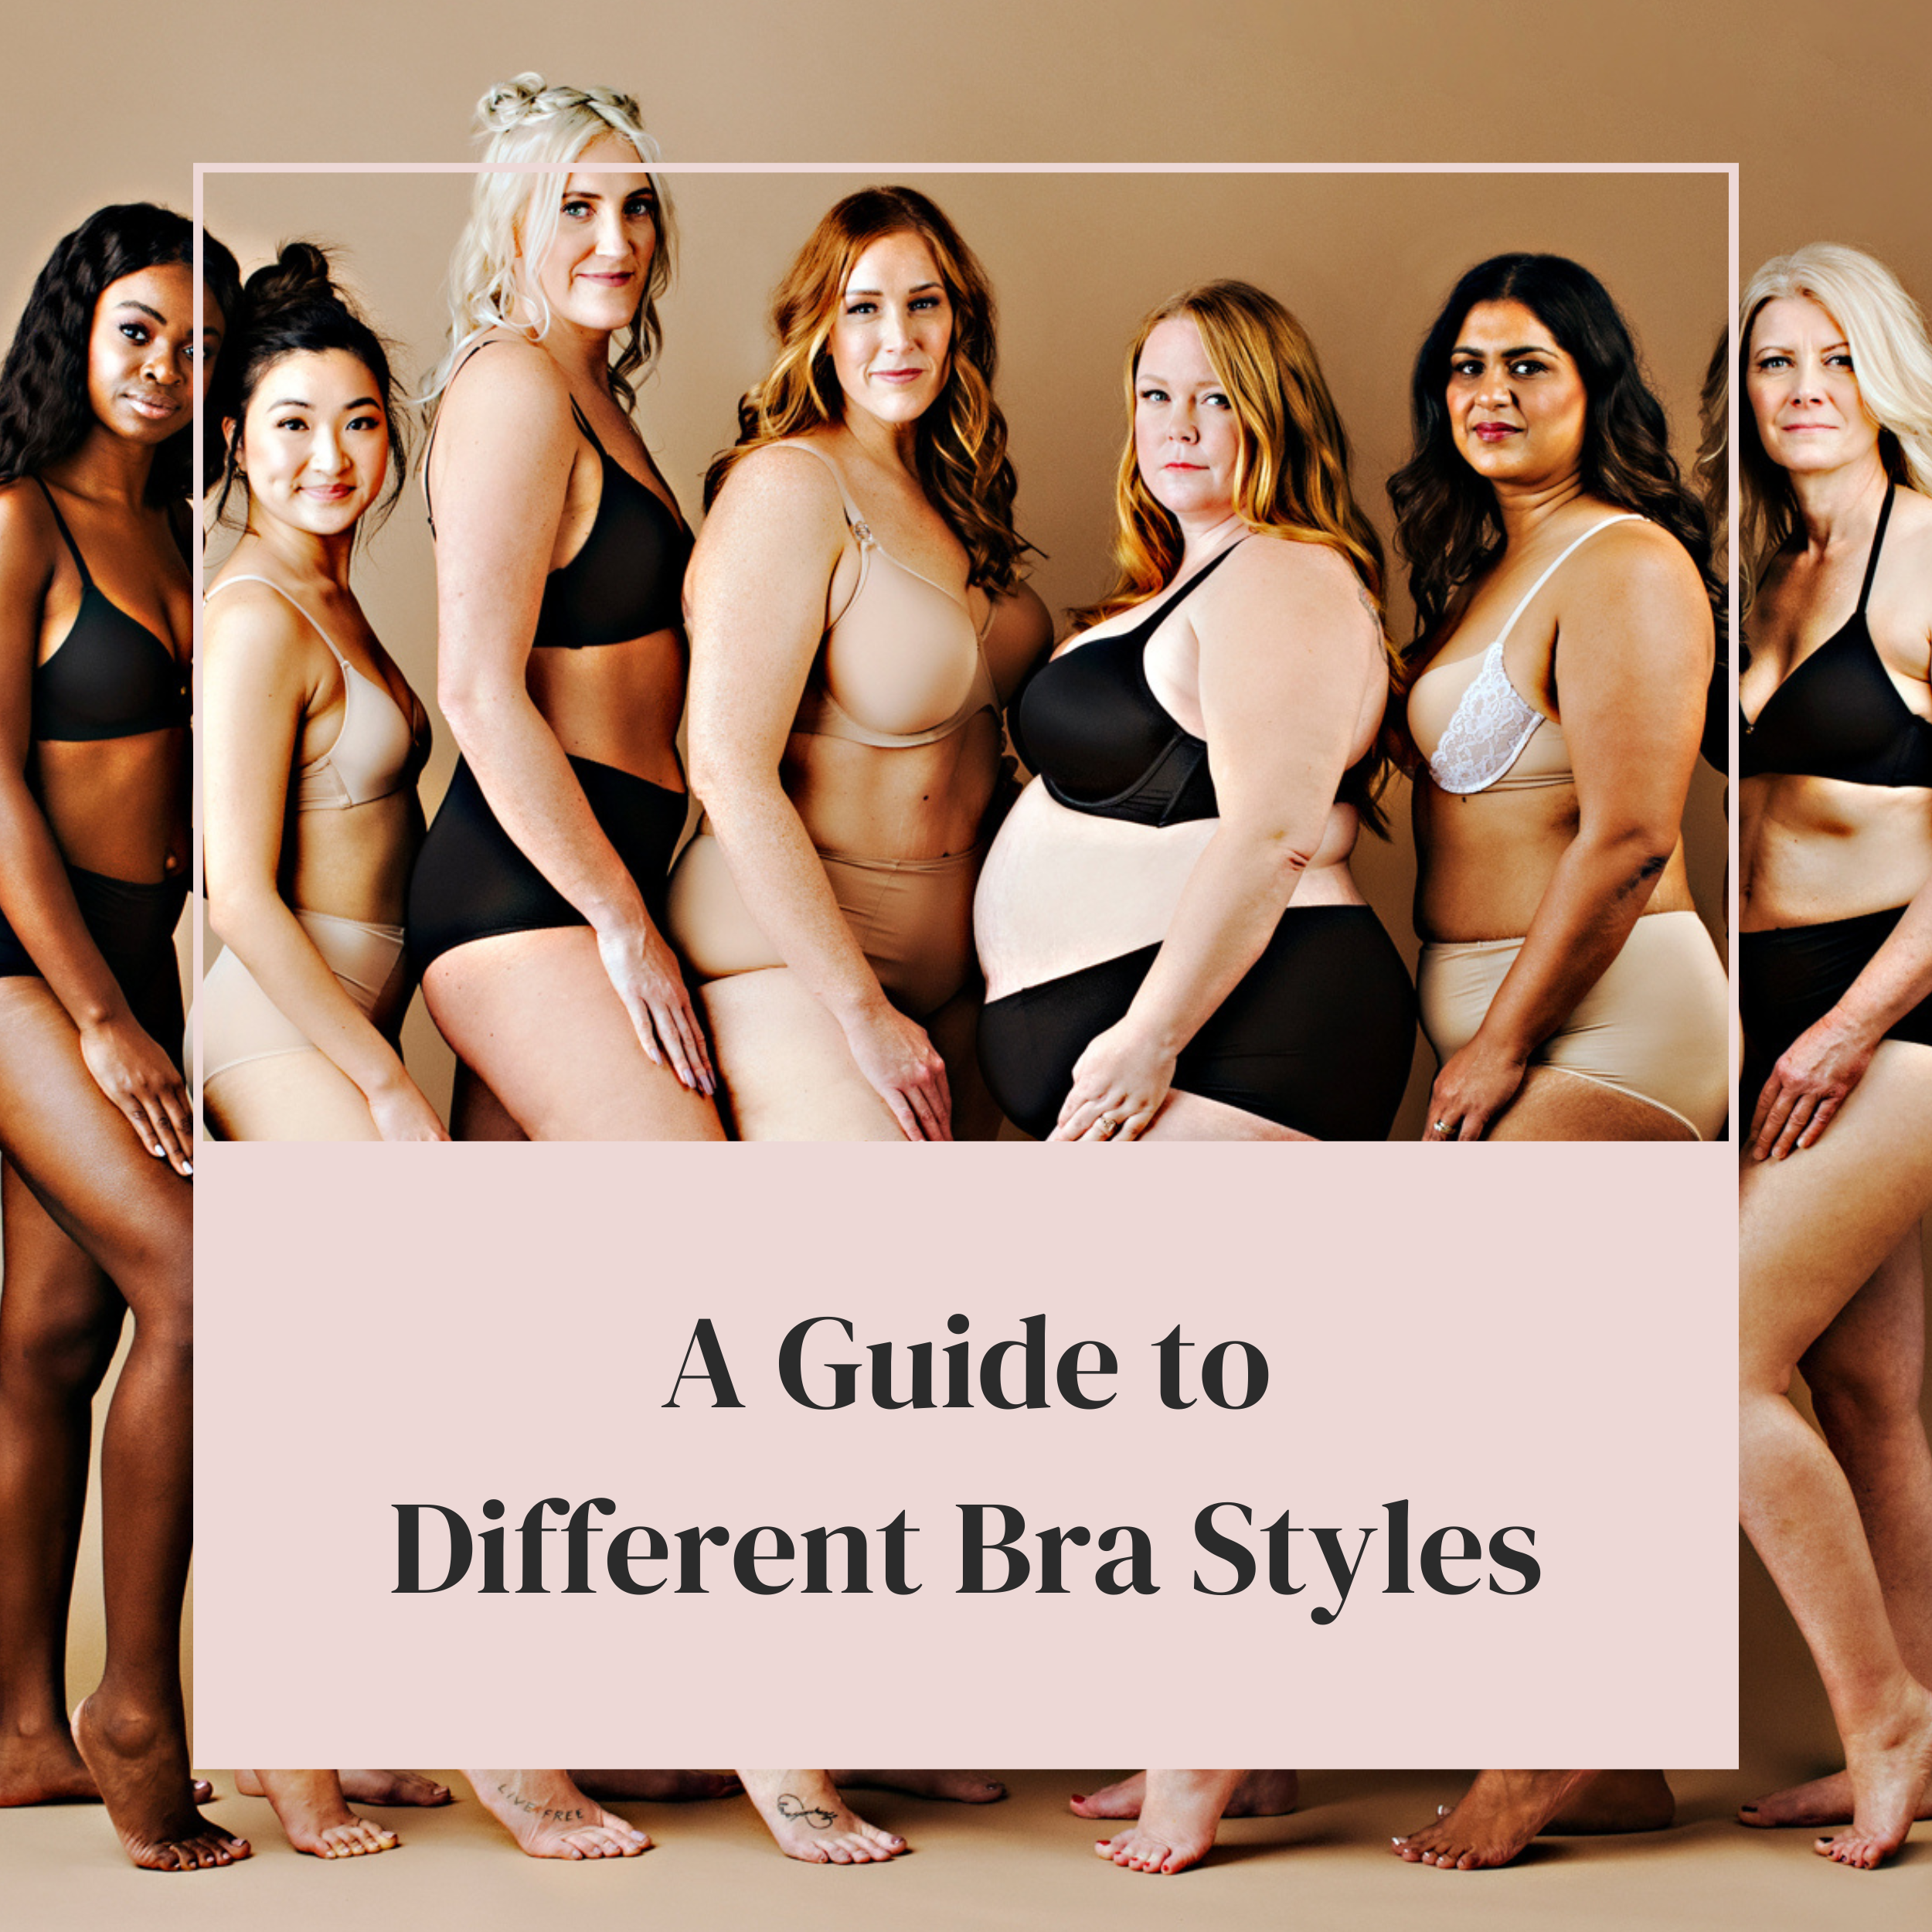 A Simple Guide Of All The Essential Bra Styles Every Woman Needs